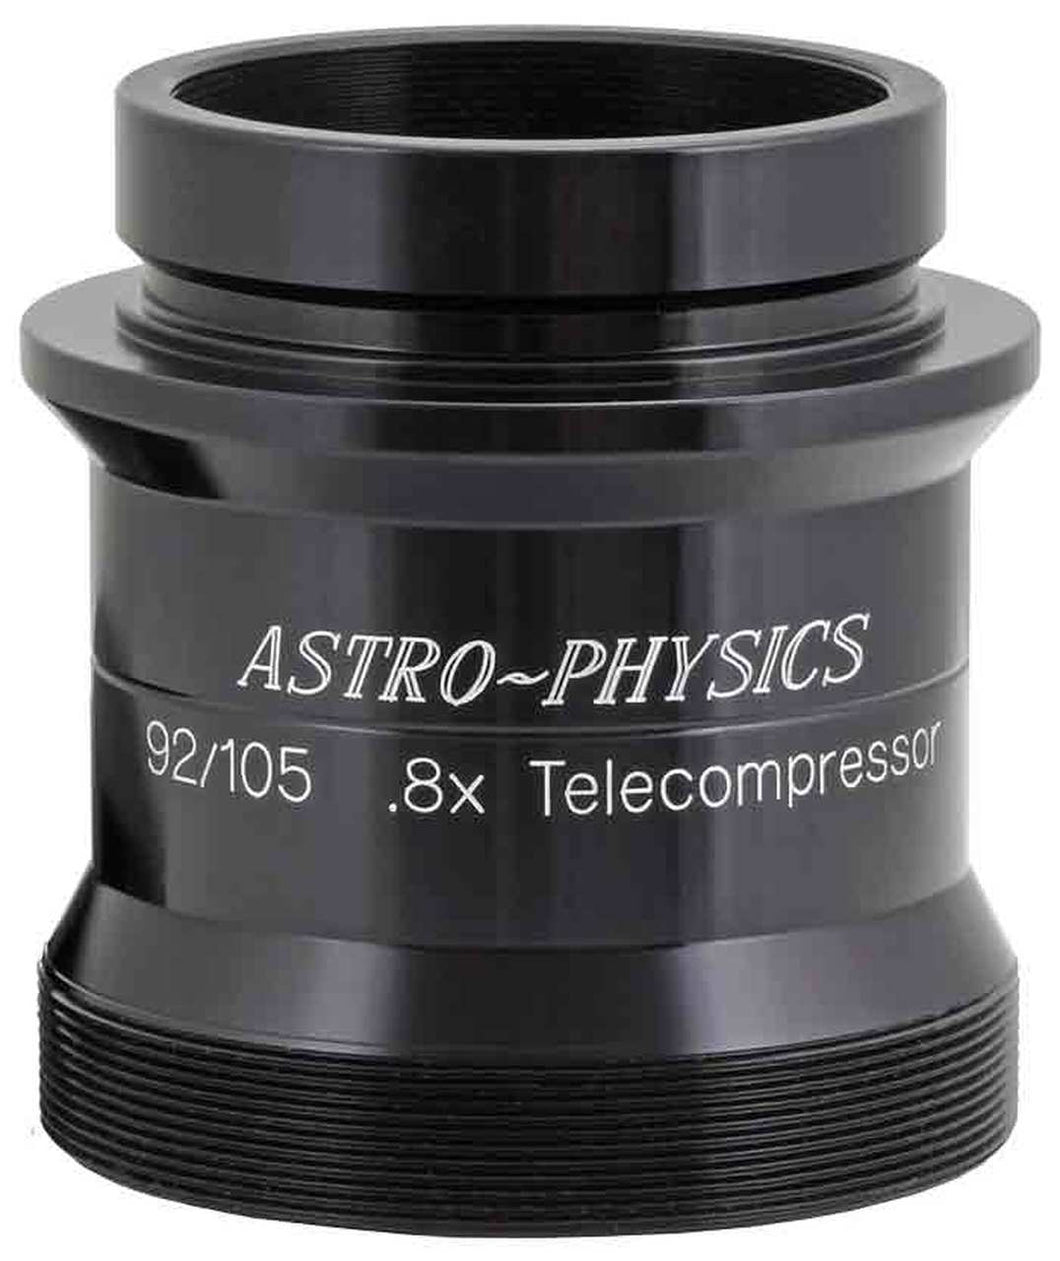 0.8x CCD Telecompressor for 92mm Stowaway and Traveler. Requires 2.5